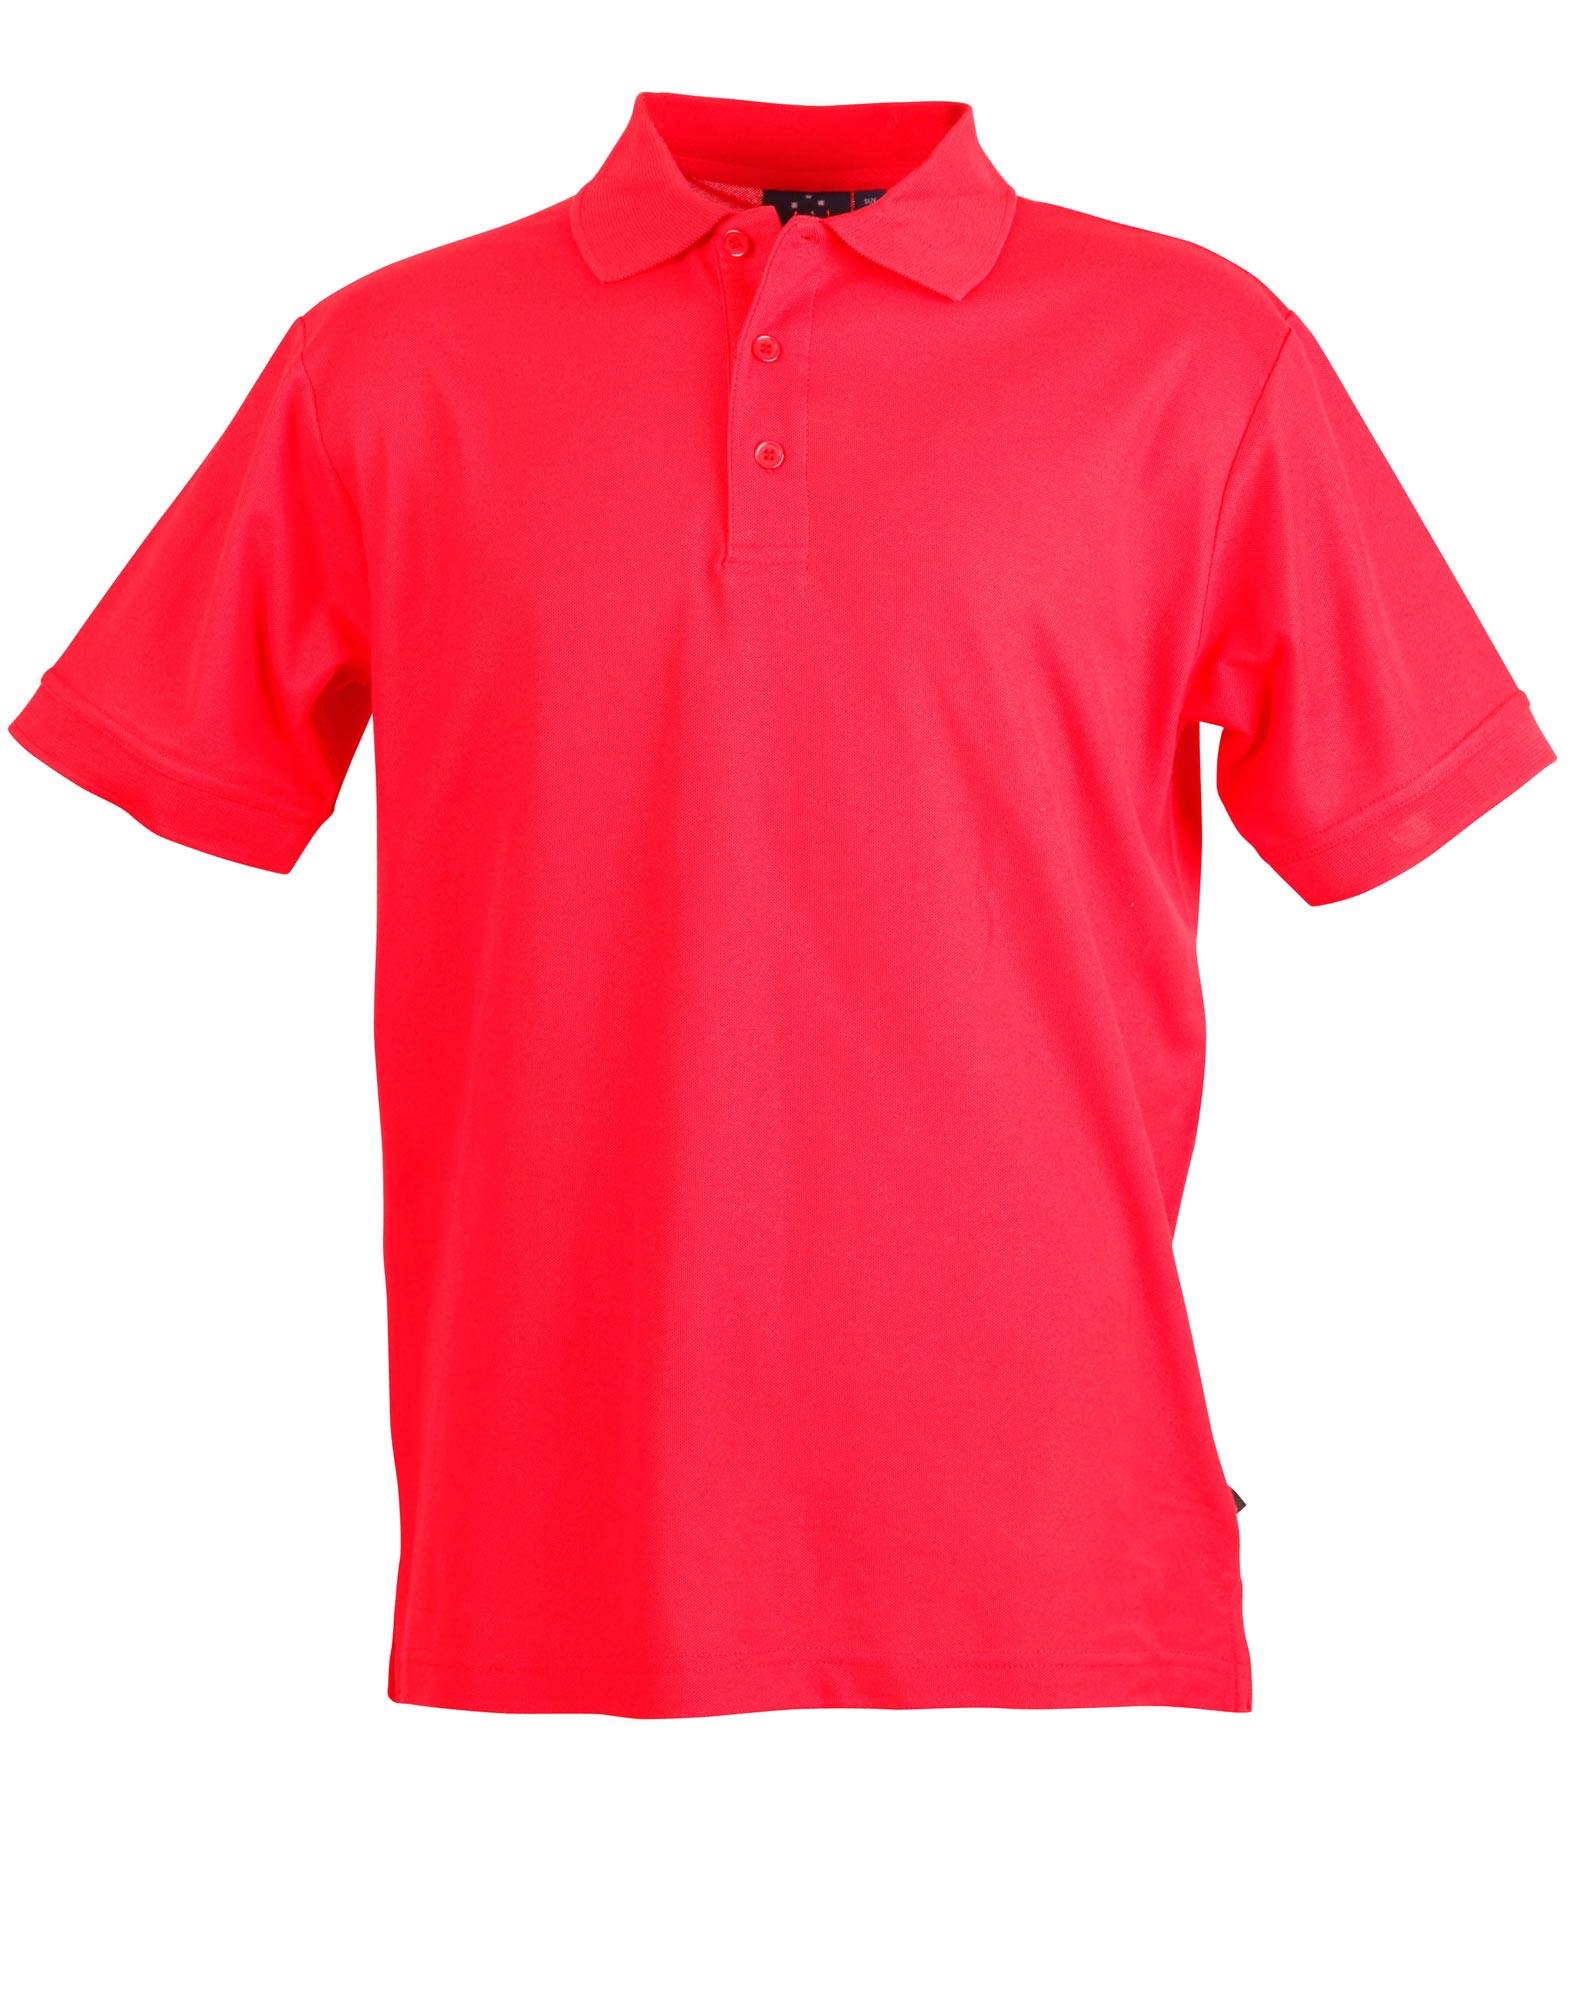 PS63/PS64 CONNECTION POLO Men’s&Ladies’